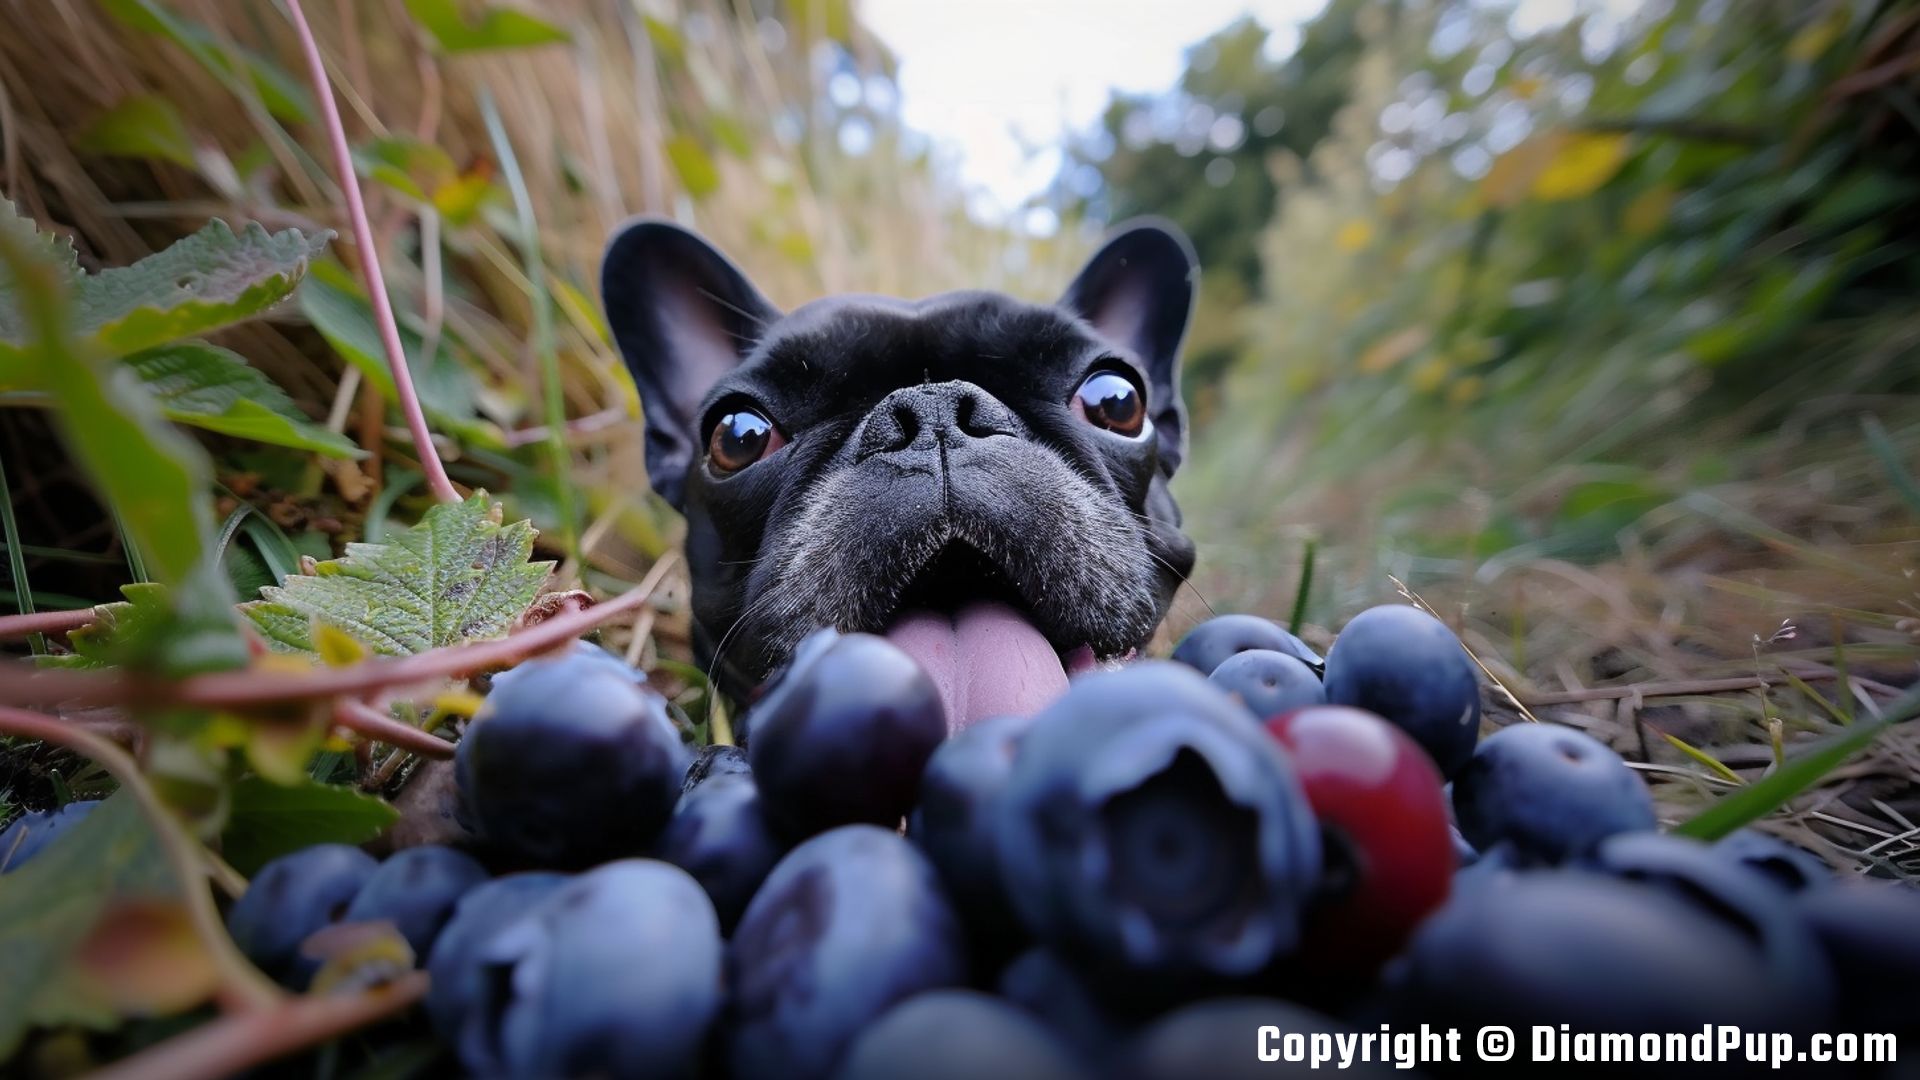 Photograph of a Playful French Bulldog Eating Blueberries